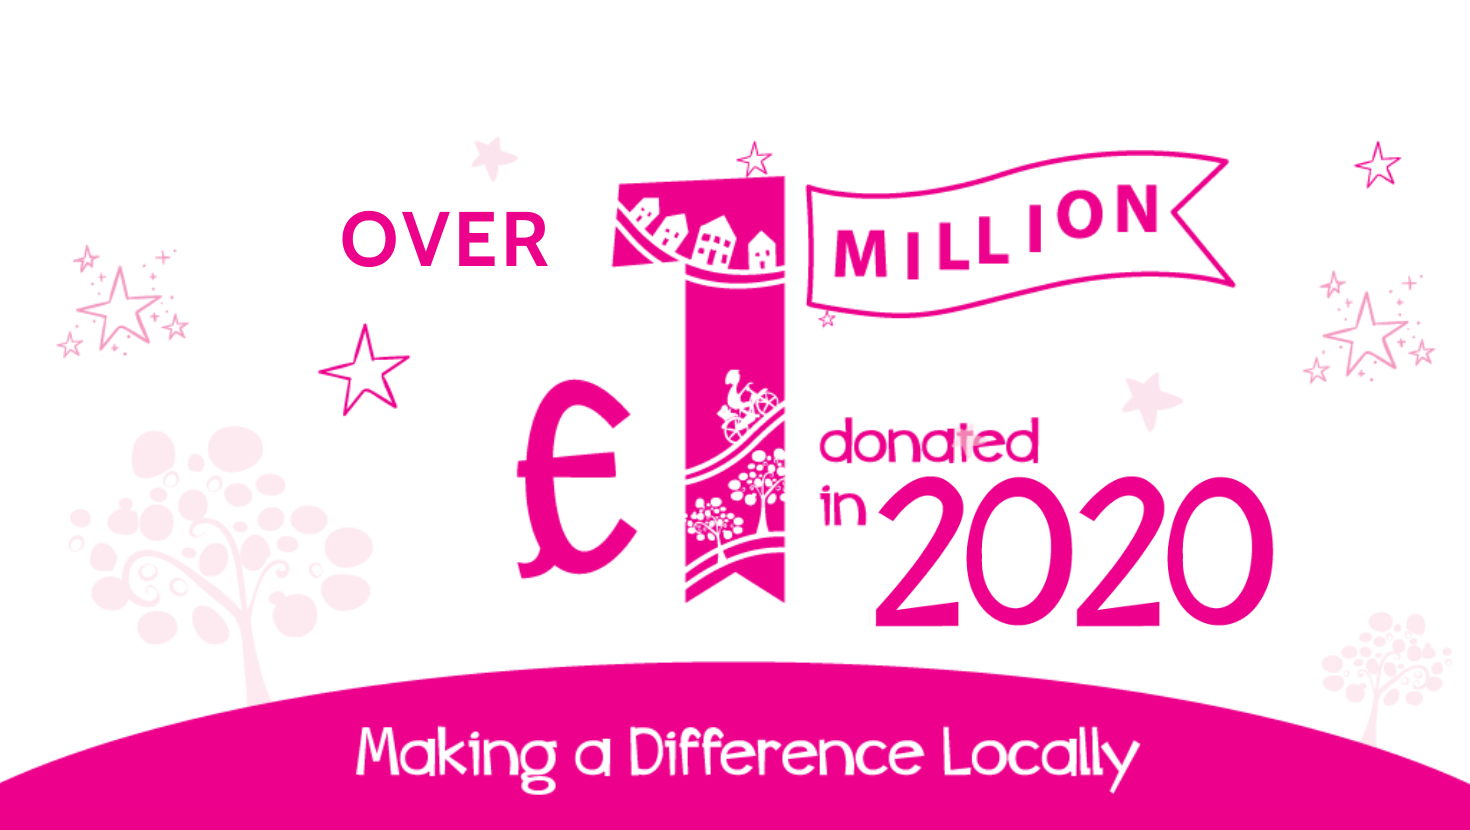 Donations from Nisa’s charity cross £1 million in 2020